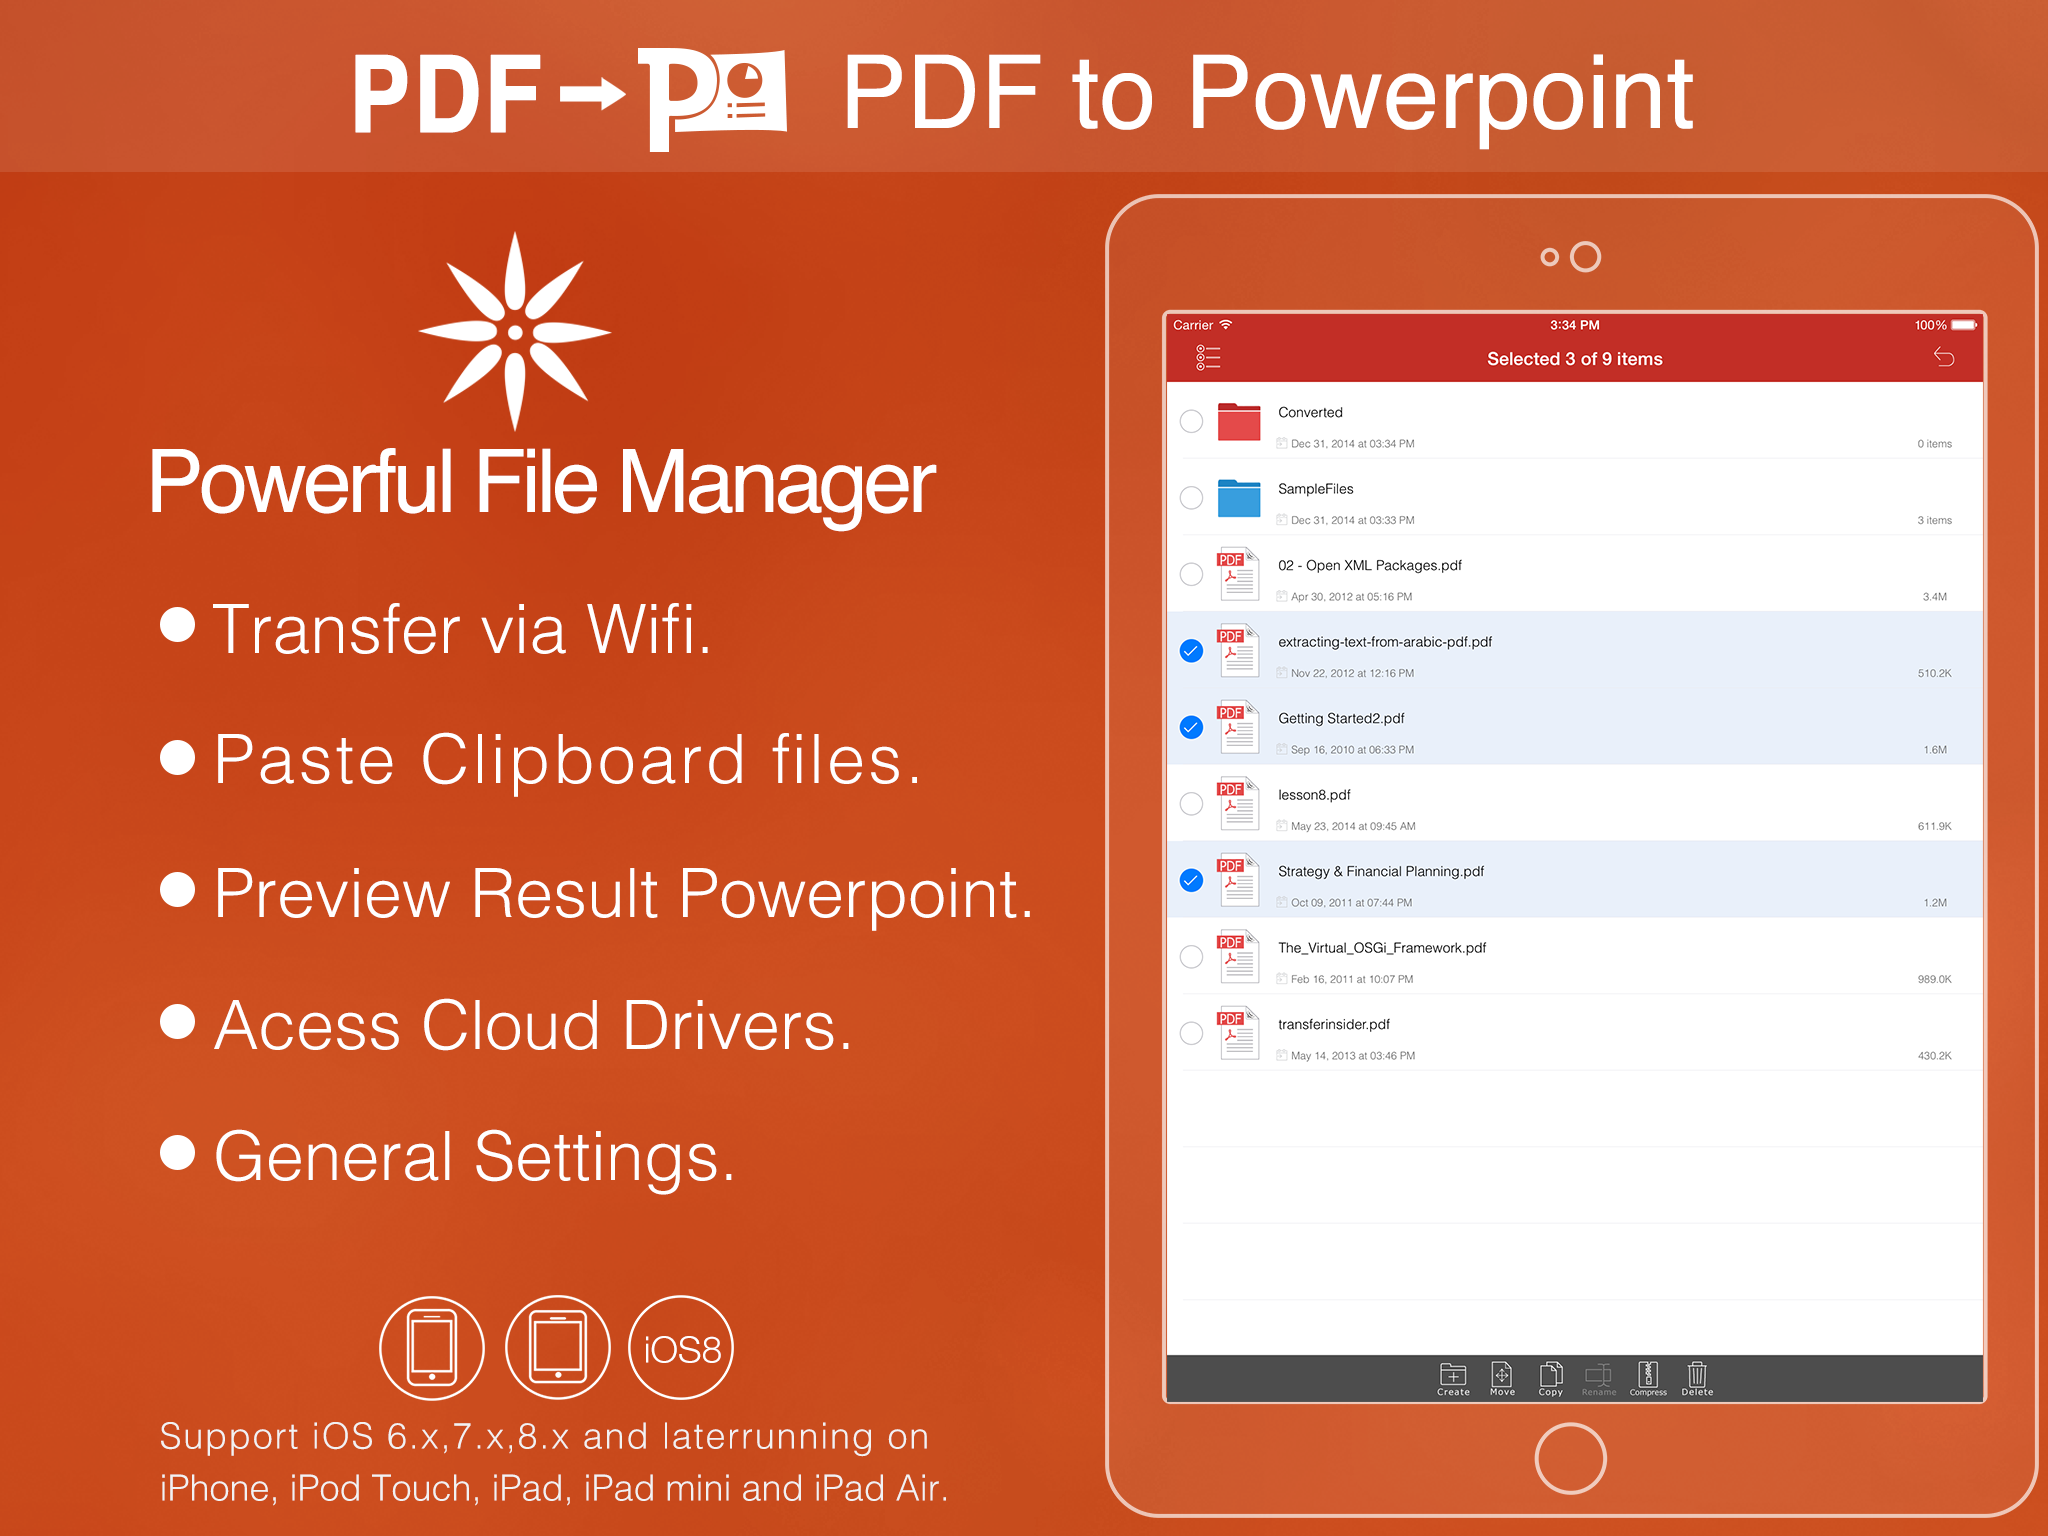 PDF to Powerpoint for iPhone, iPad and other iOS devices ...